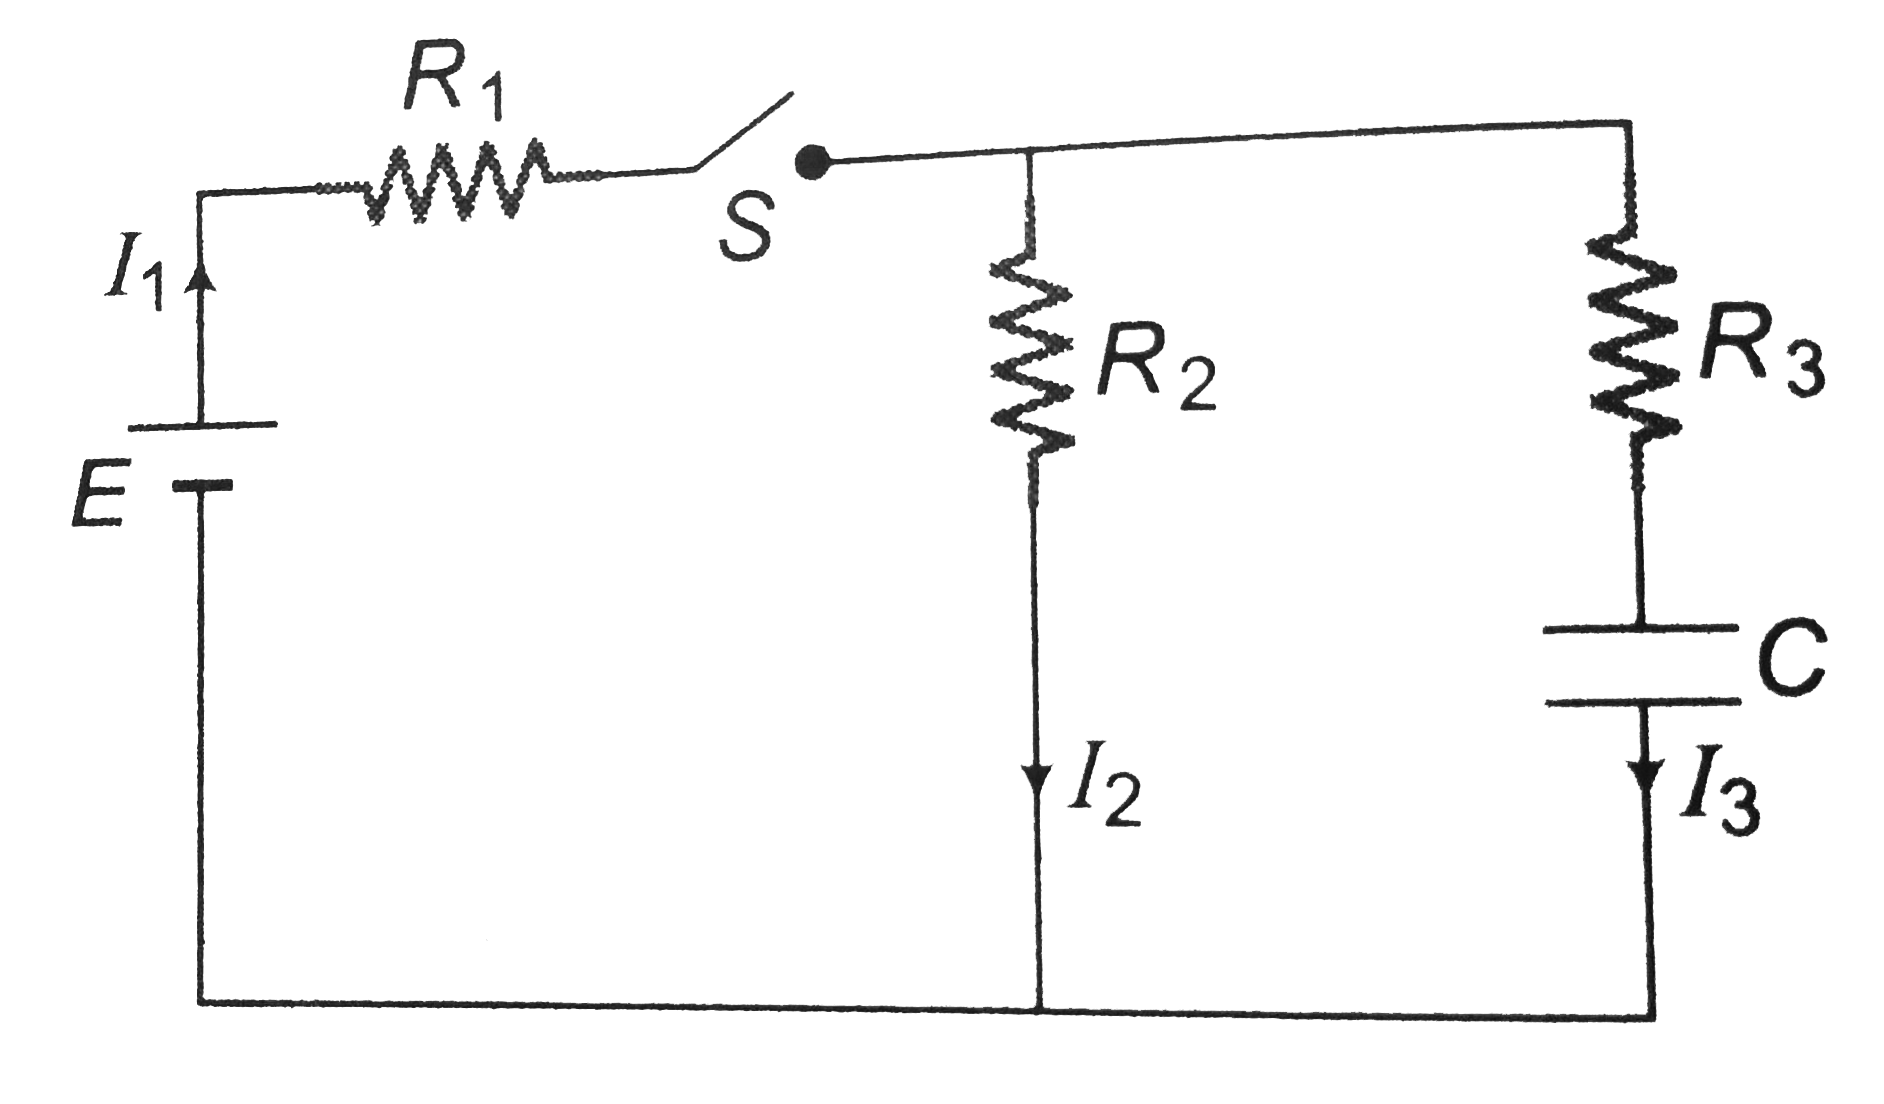 In the circuit shown, E = 18 kV, C = 10 muF,R1 = 4 MOmega, R2 = 6 MOmega , R3 = 3MOmega with c completely uncharged, switch S is suddenly closed (at t = 0).      (a) Determine the current through each resistor for t=0 and t=0  (b) What are the values of V2 (potential difference across R2) at t = 0 and t = oo. ?  (c) Plot a graph of the potential difference V2 versus t and determine the instantaneous value of V2.